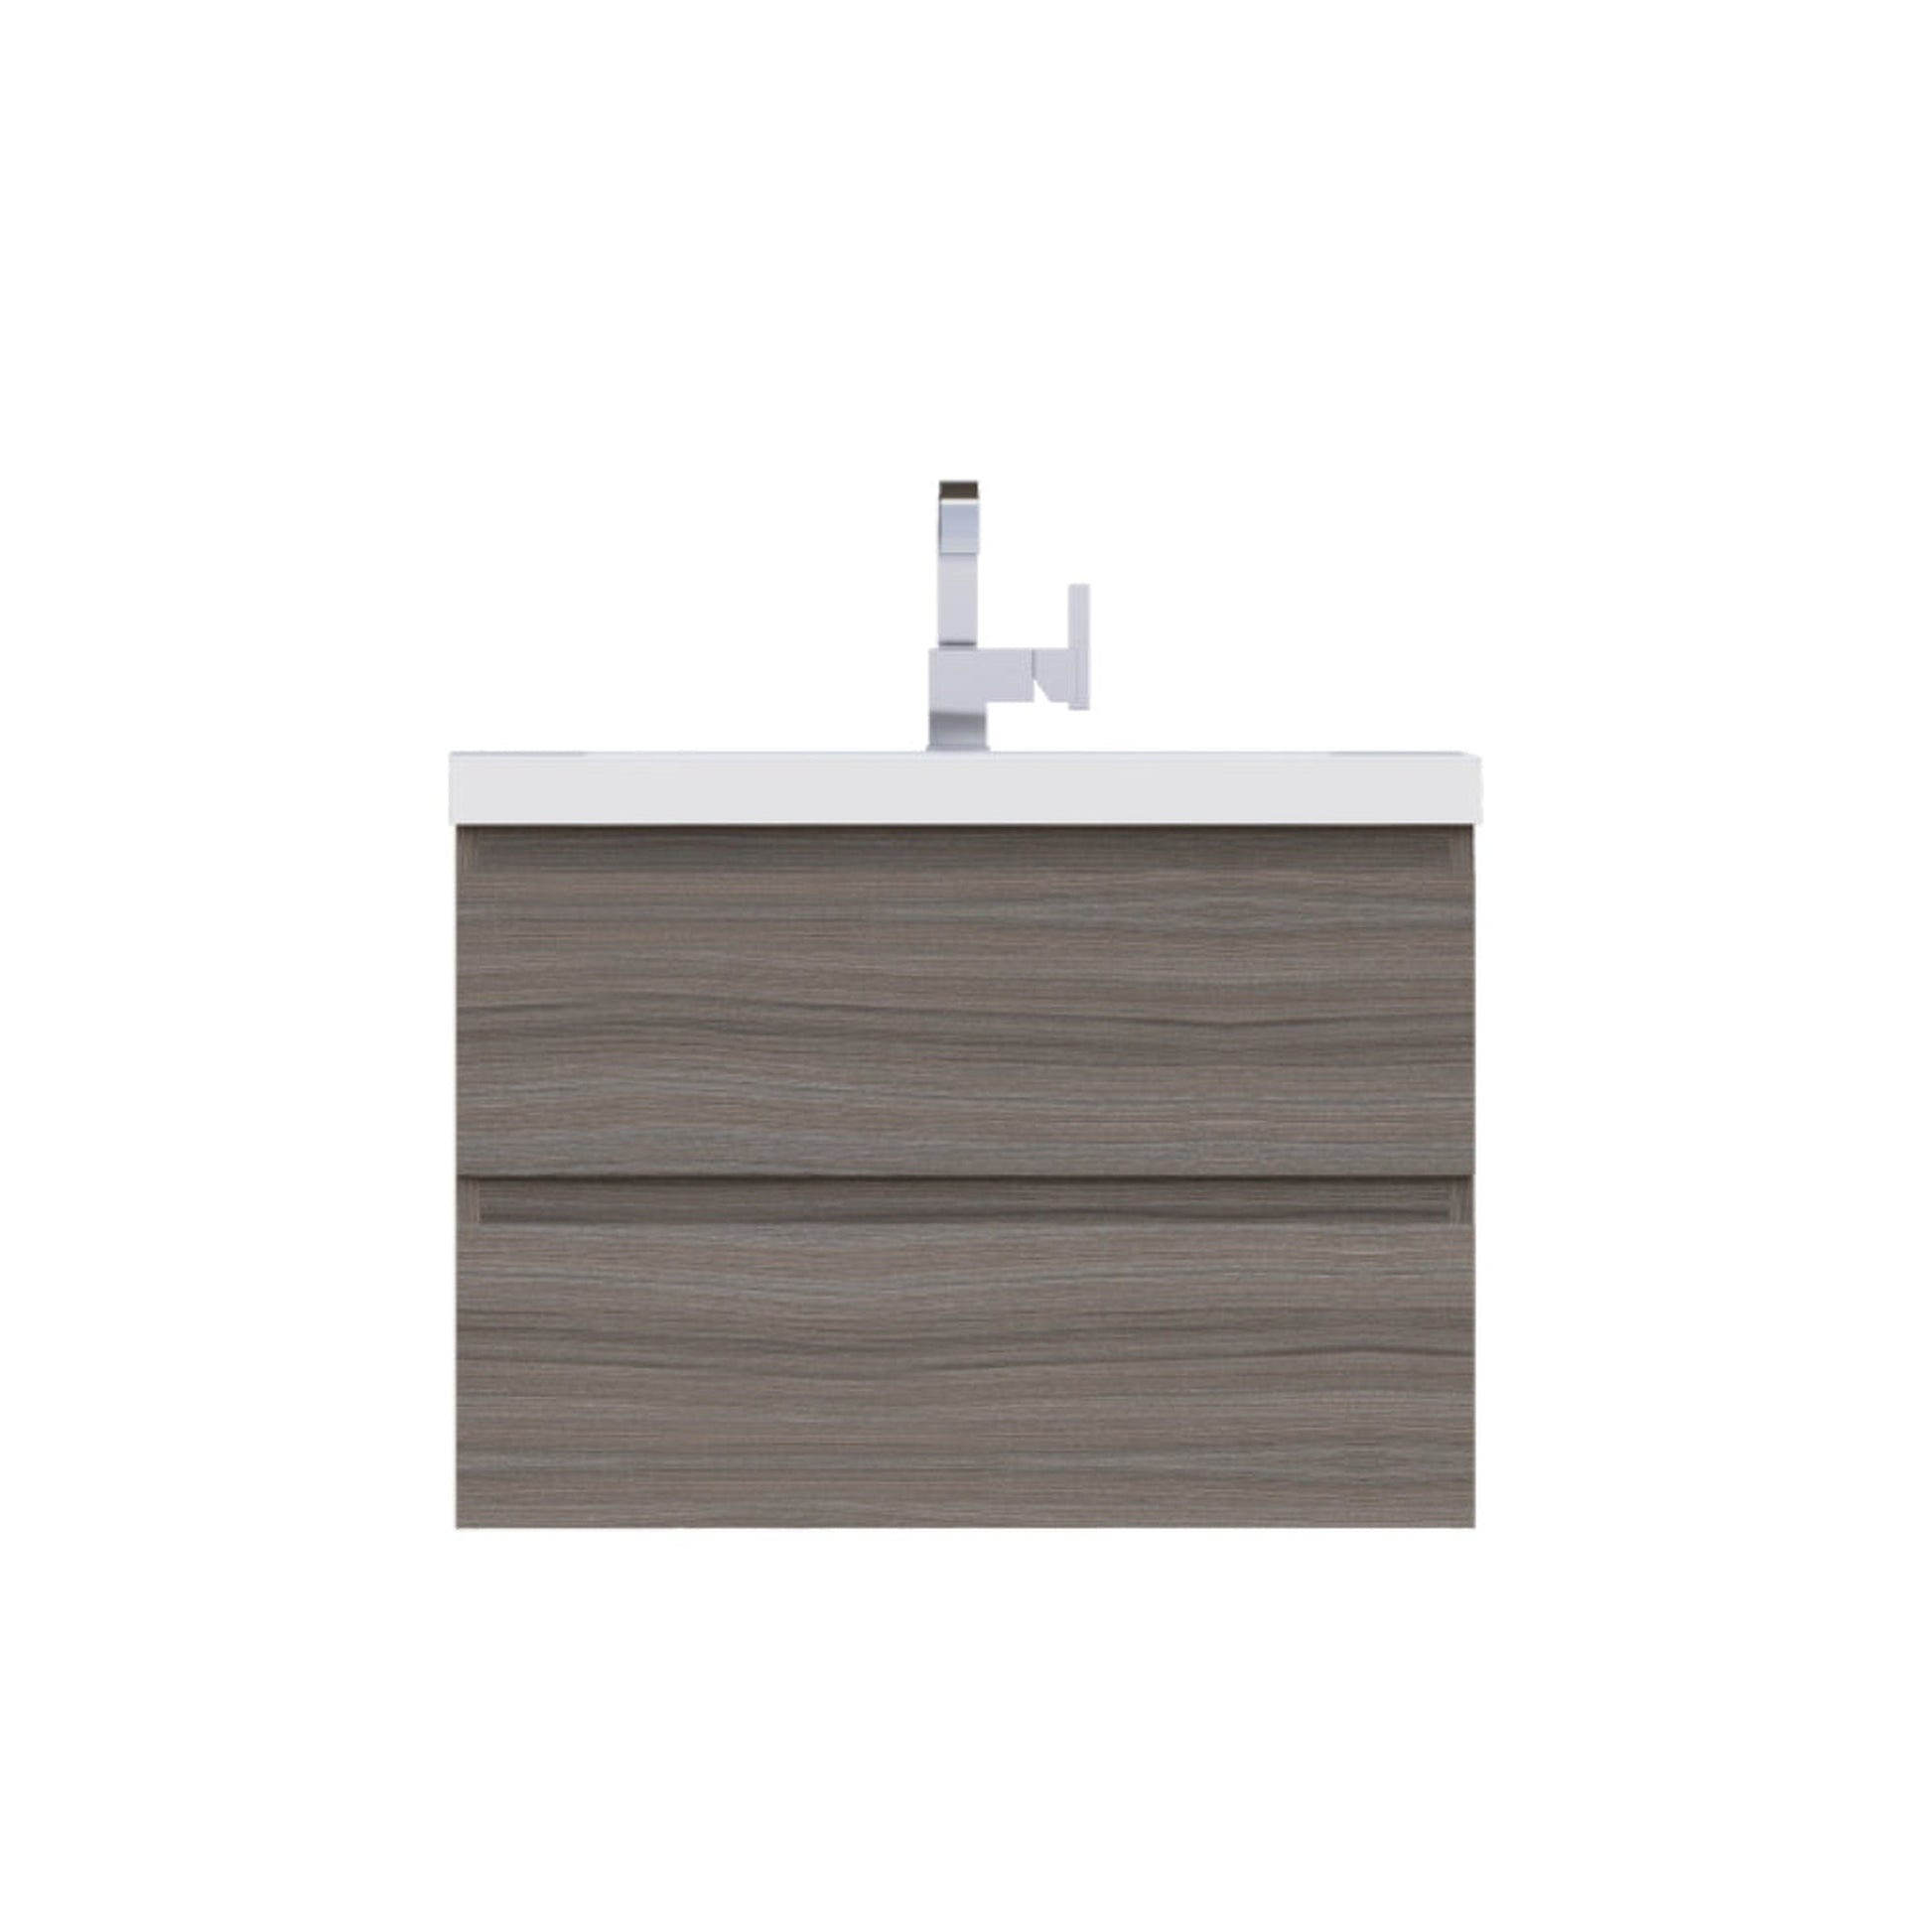 Alya Bath Paterno 30" Single Gray Wall Mounted Bathroom Vanity With Acrylic Top and Integrated Sink